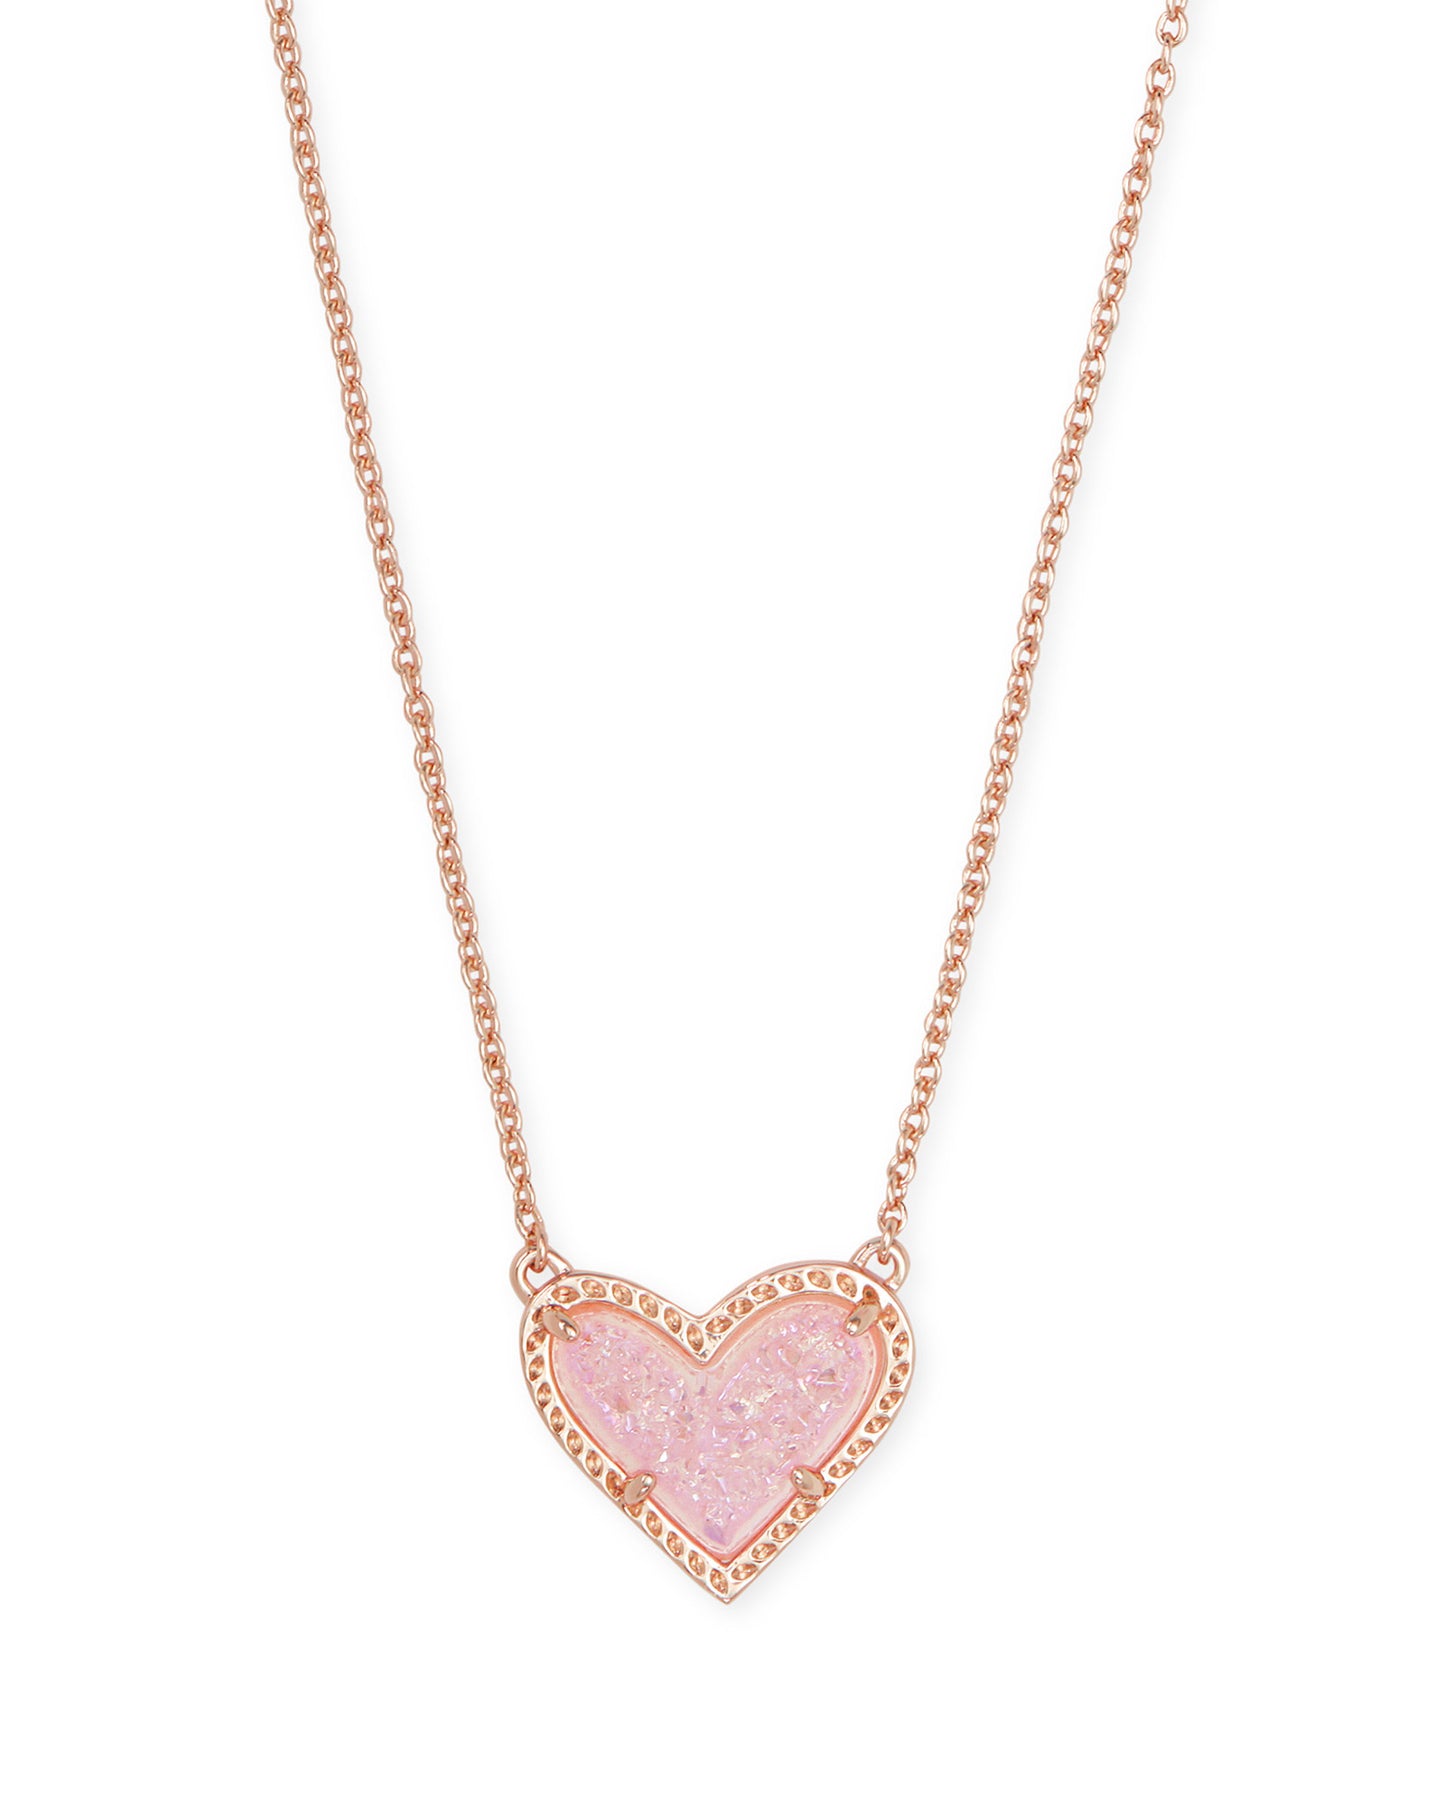 Ari Heart Rose Gold Necklace In Light Pink Drusy